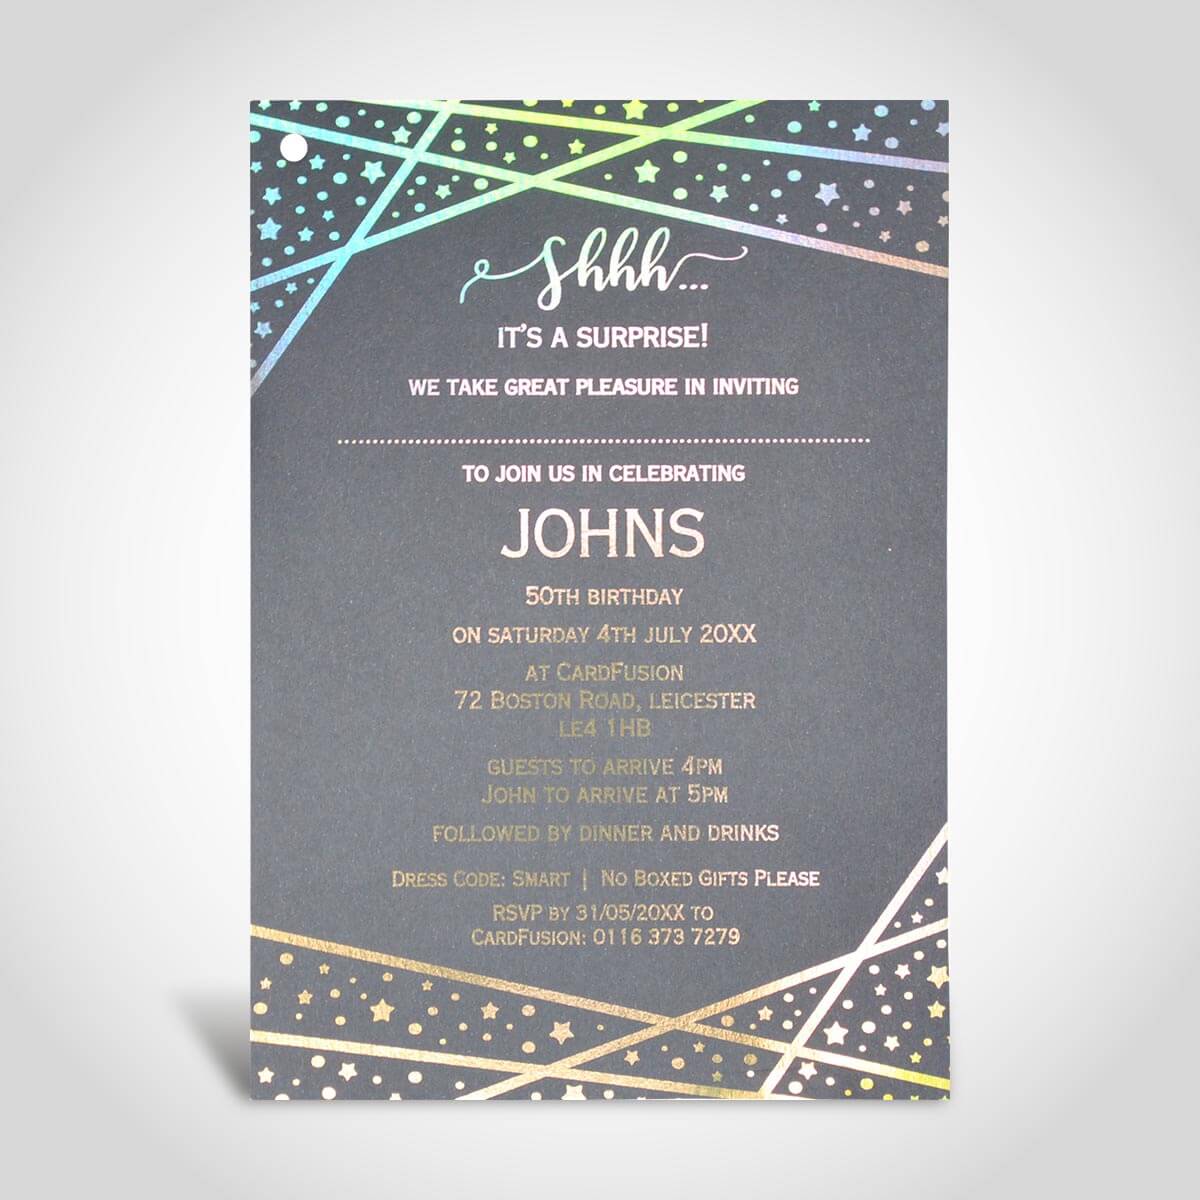 ID 26 – Gold Holographic foil on Black card